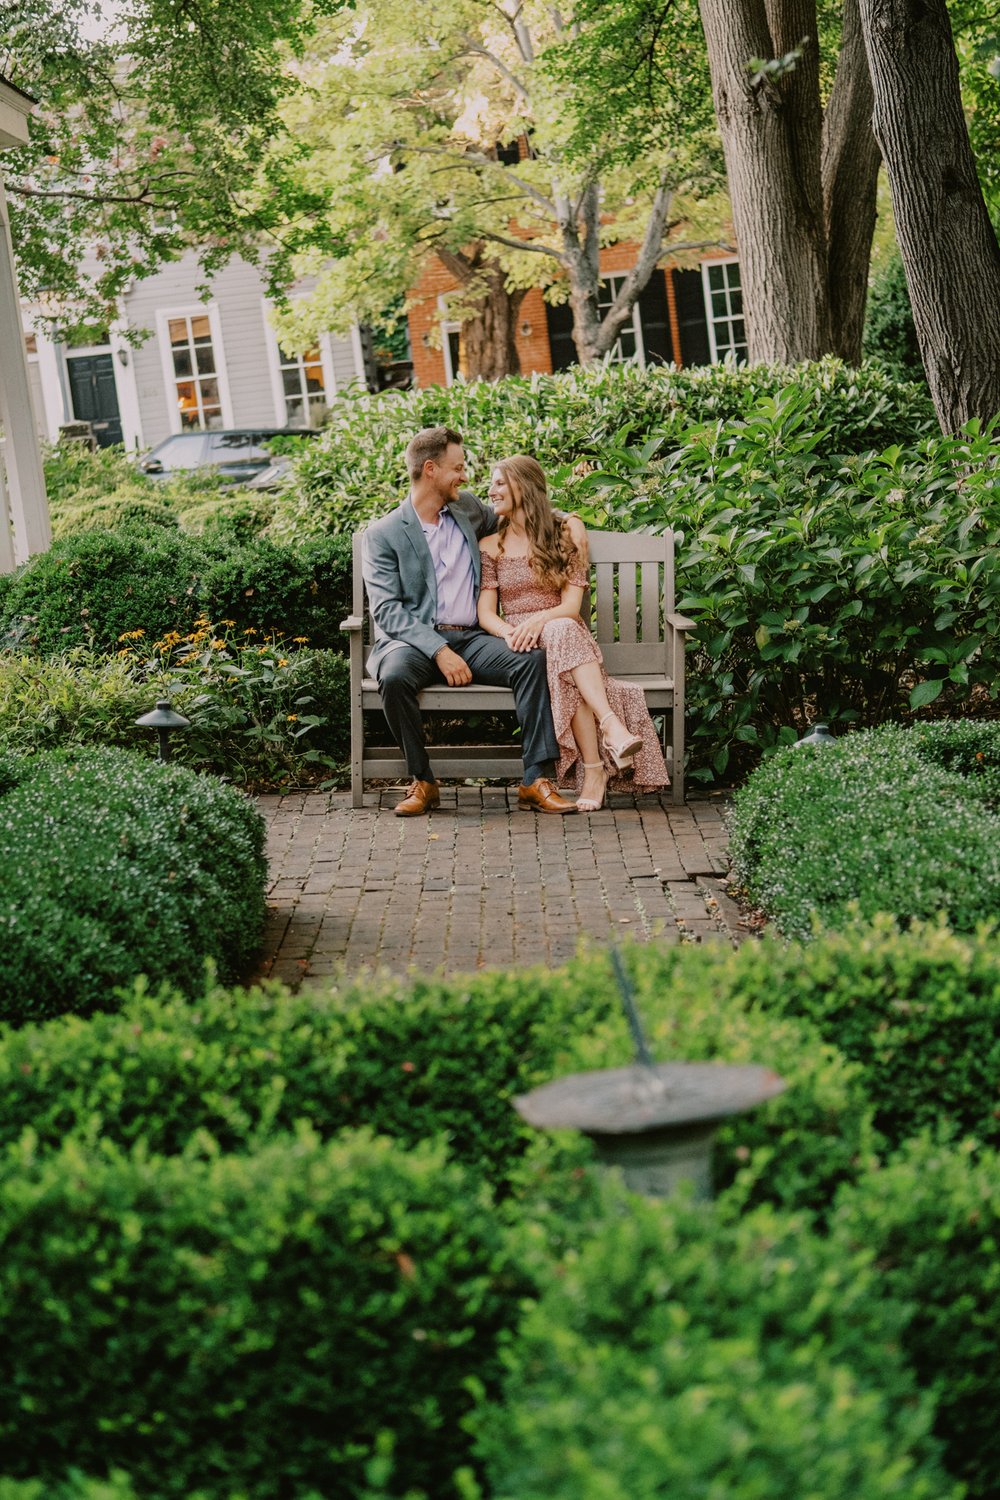 Old town alexandria couple sitting on a bench in a garden